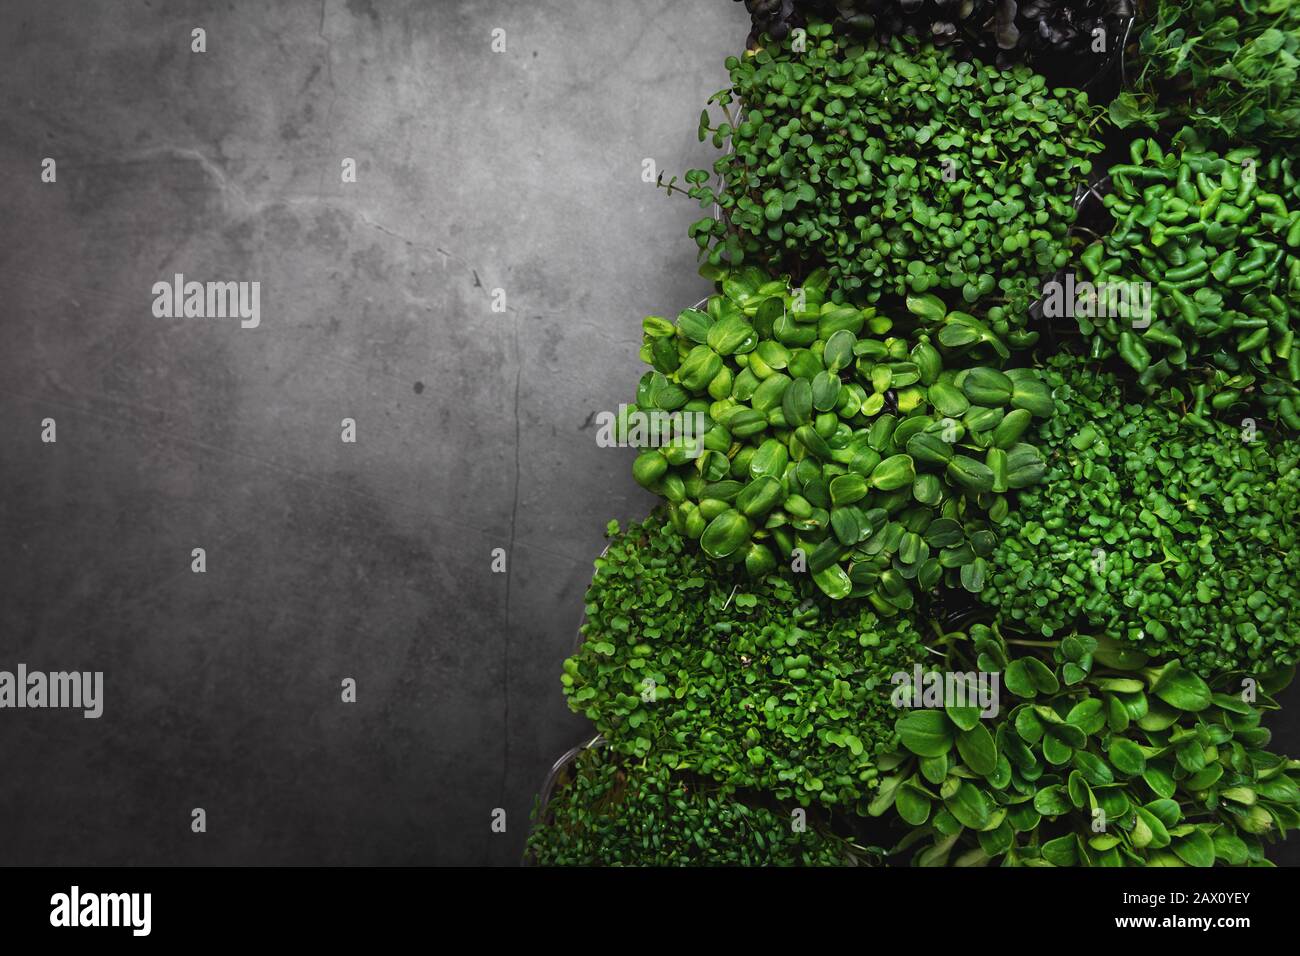 mix of microgreens containers on black stone background with copy space Stock Photo